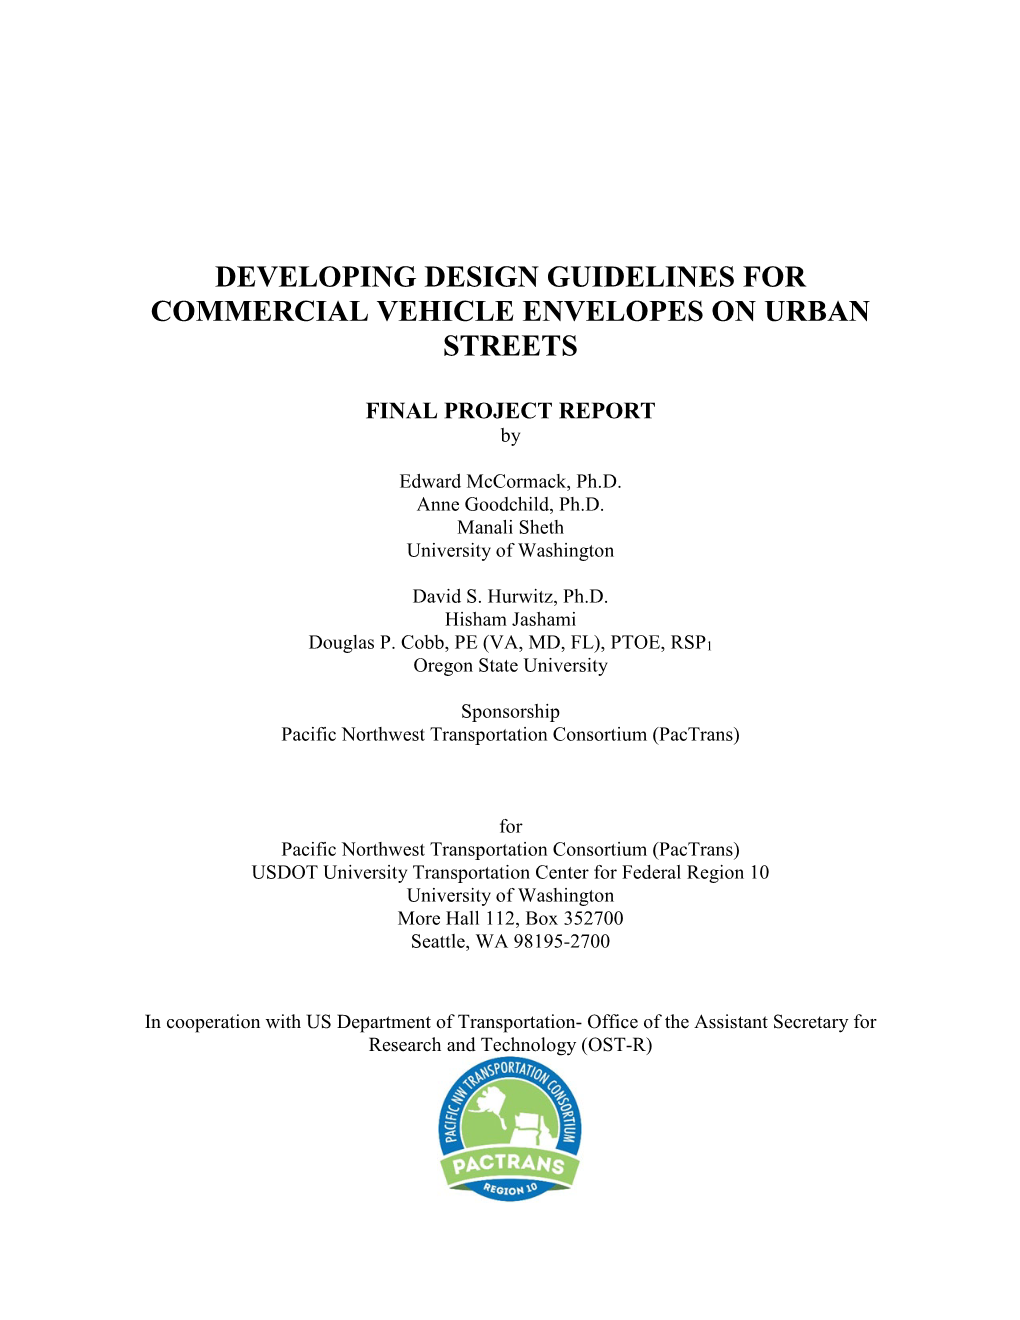 Developing Design Guidelines for Commercial Vehicle Envelopes on Urban Streets